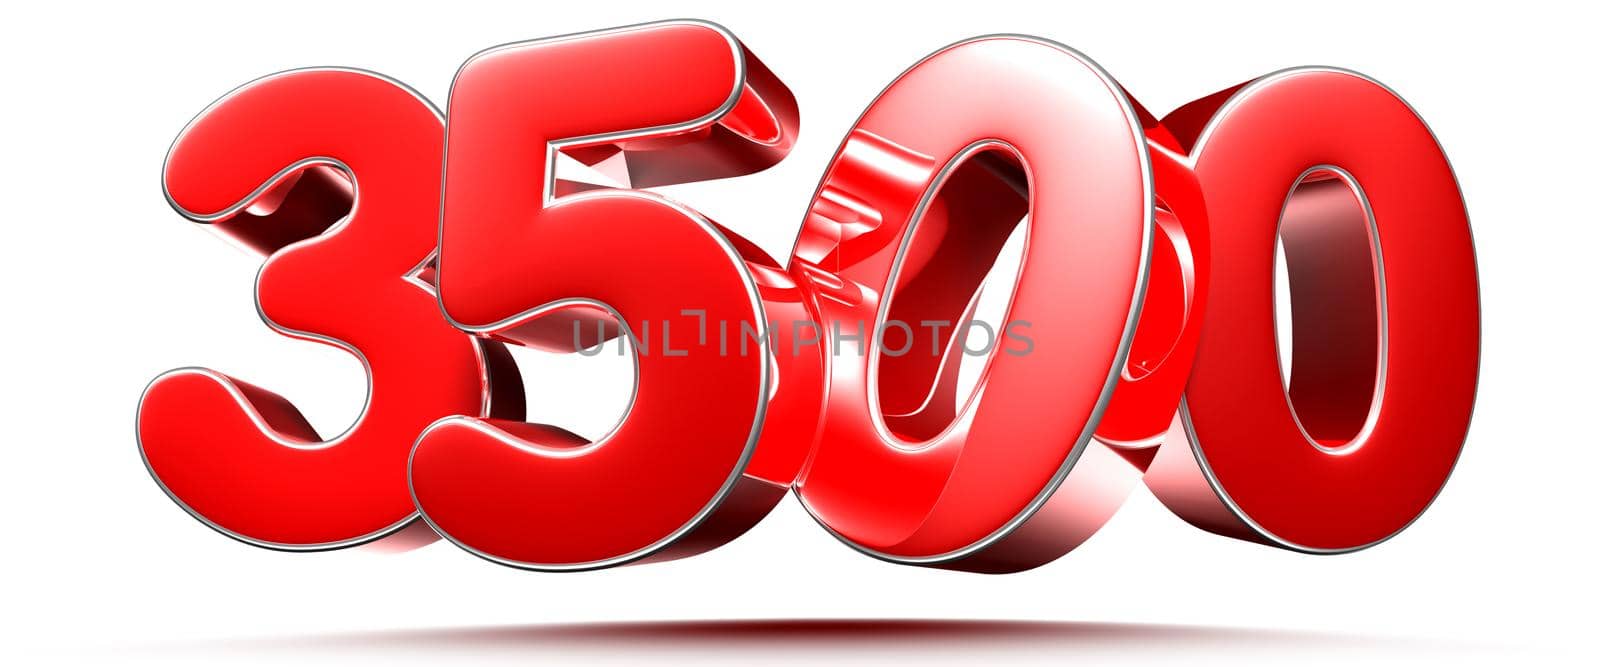 Rounded red numbers 3500 on white background 3D illustration with clipping path